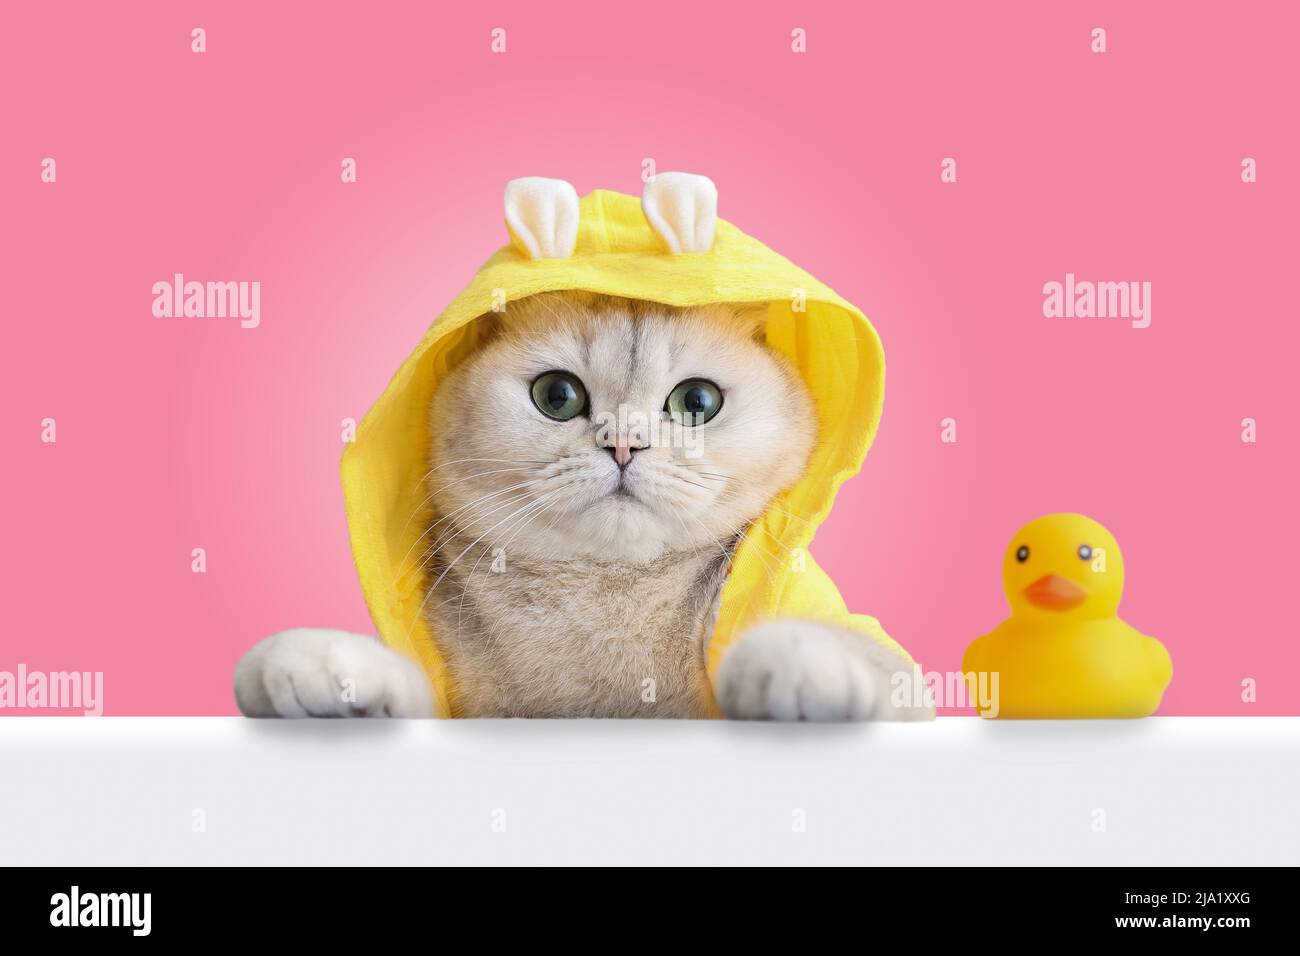 A funny white cat in a yellow coat looks out of a white shell, a yellow rubber duck stands nearby, on a pink background. Stock Photo